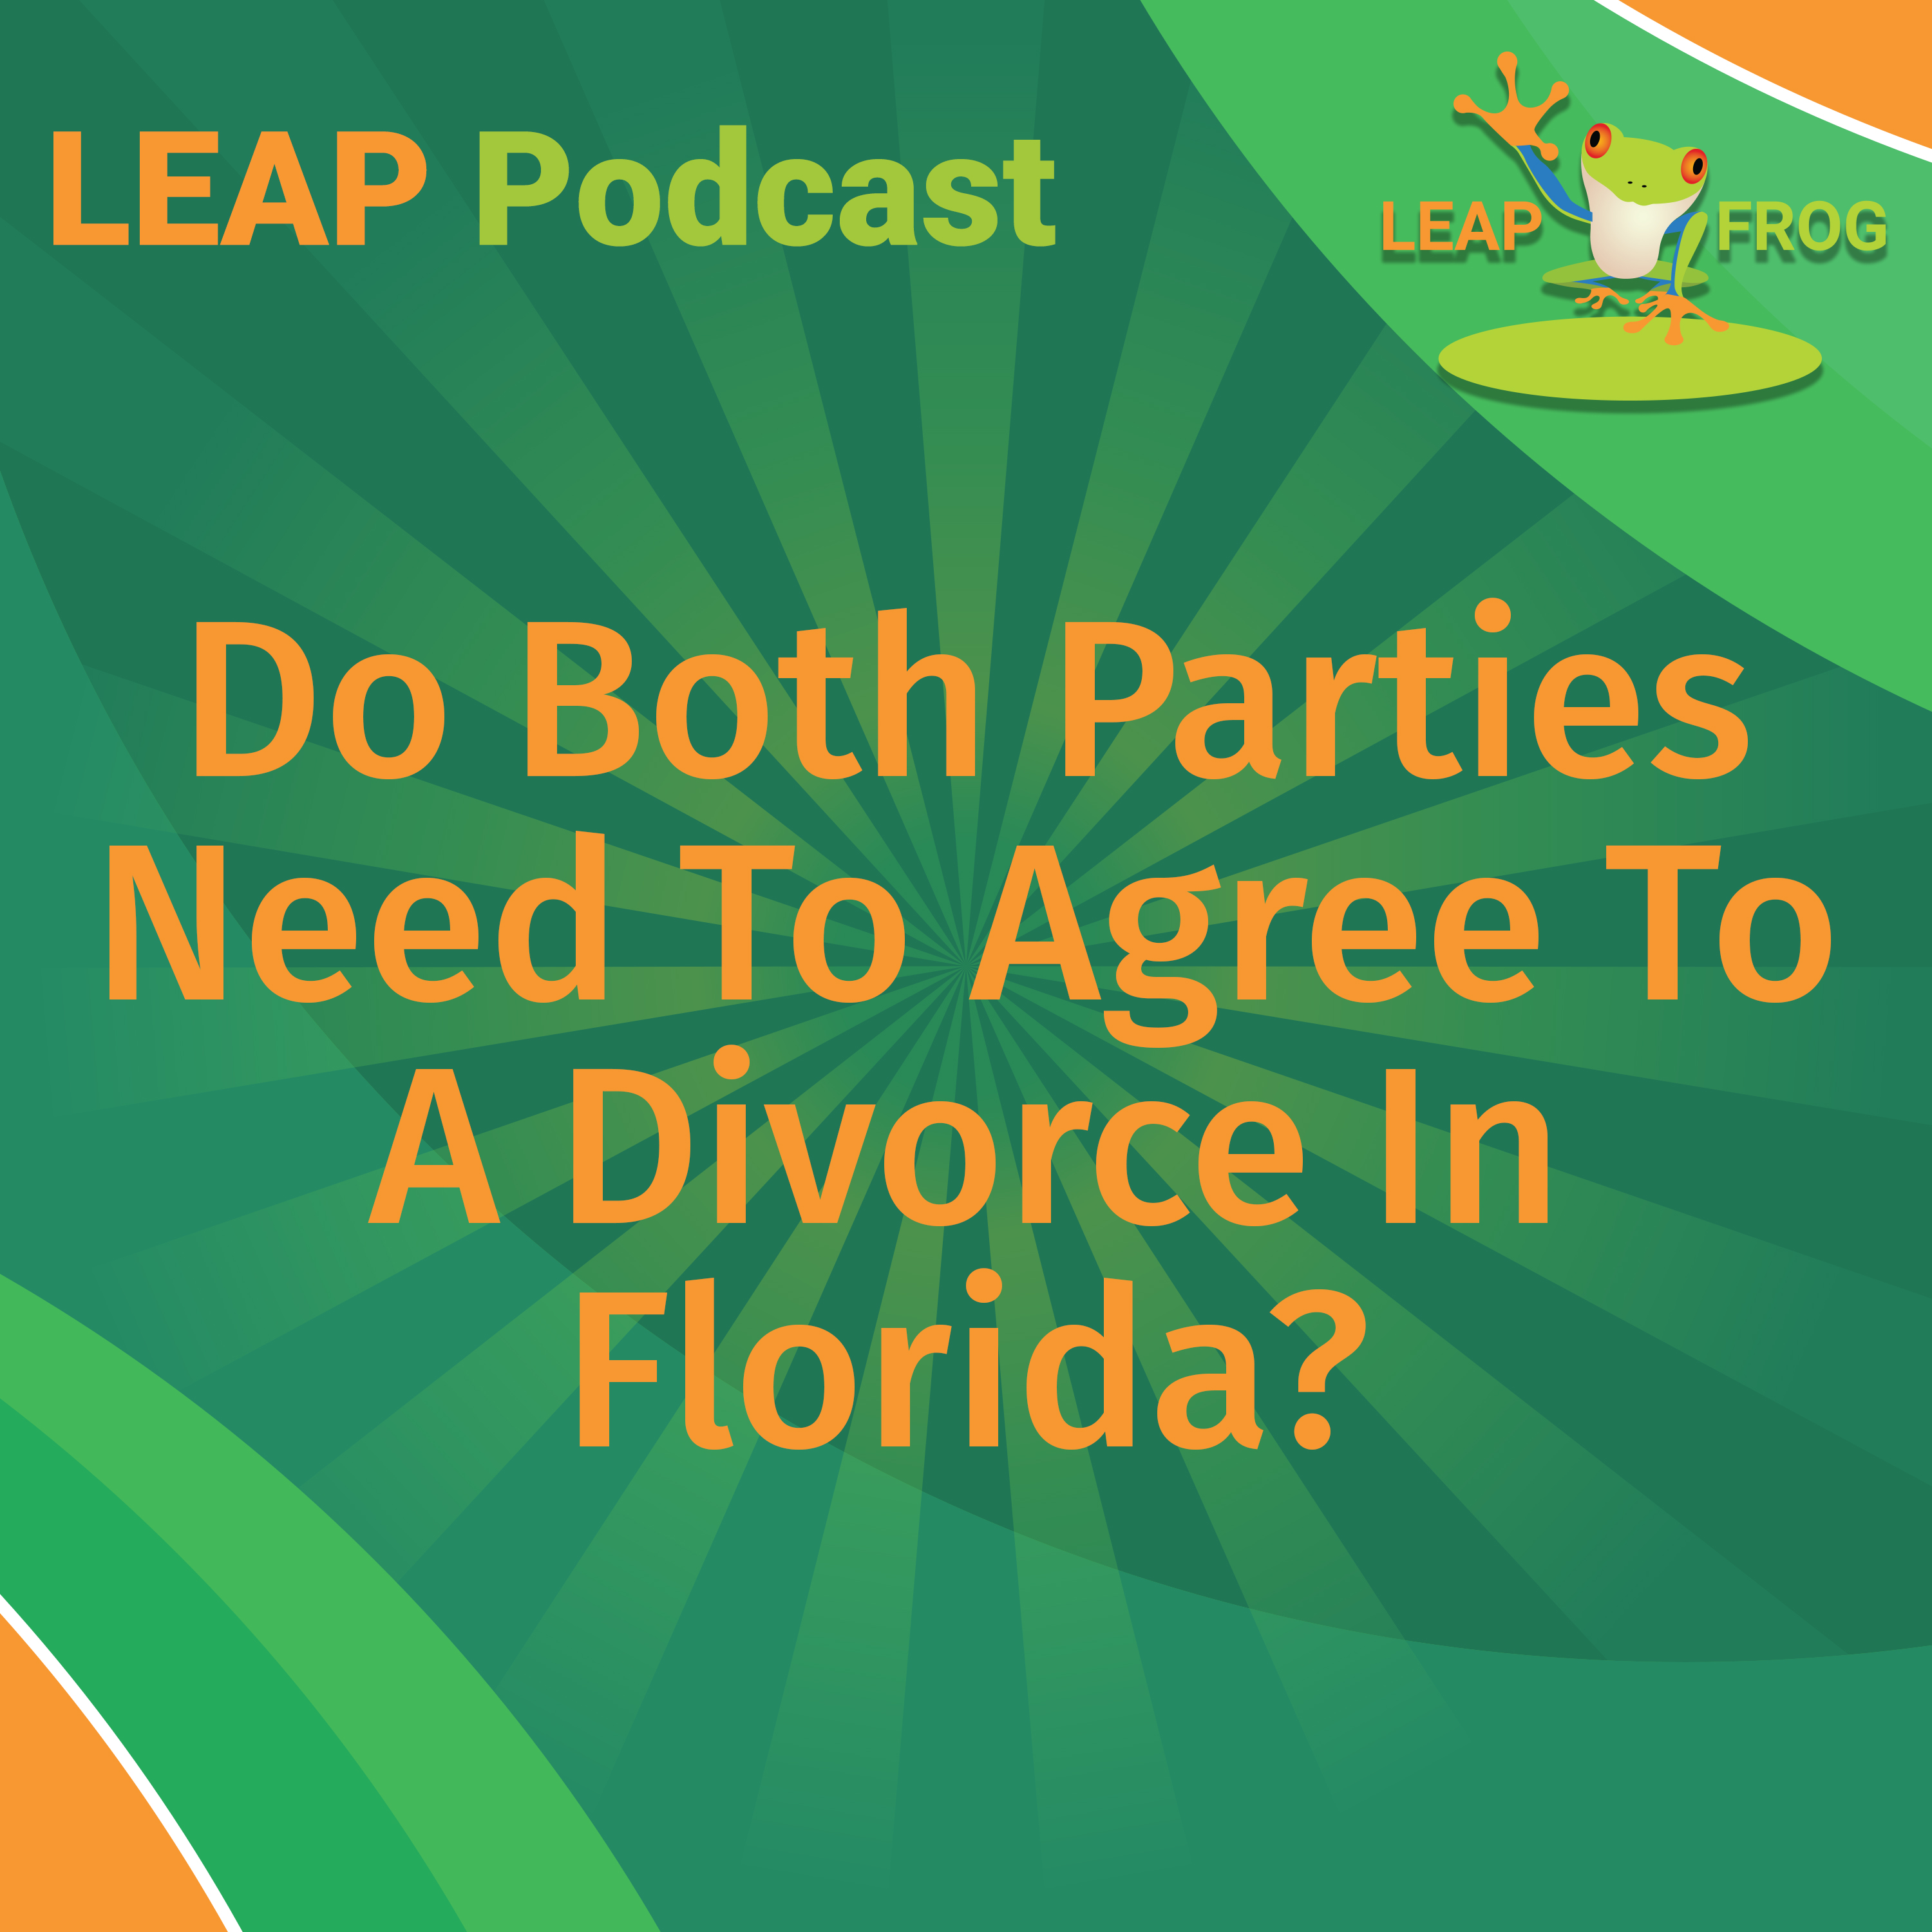 LEAP Podcast Do Both Parties Need To Agree To A Divorce In Florida episode cover art